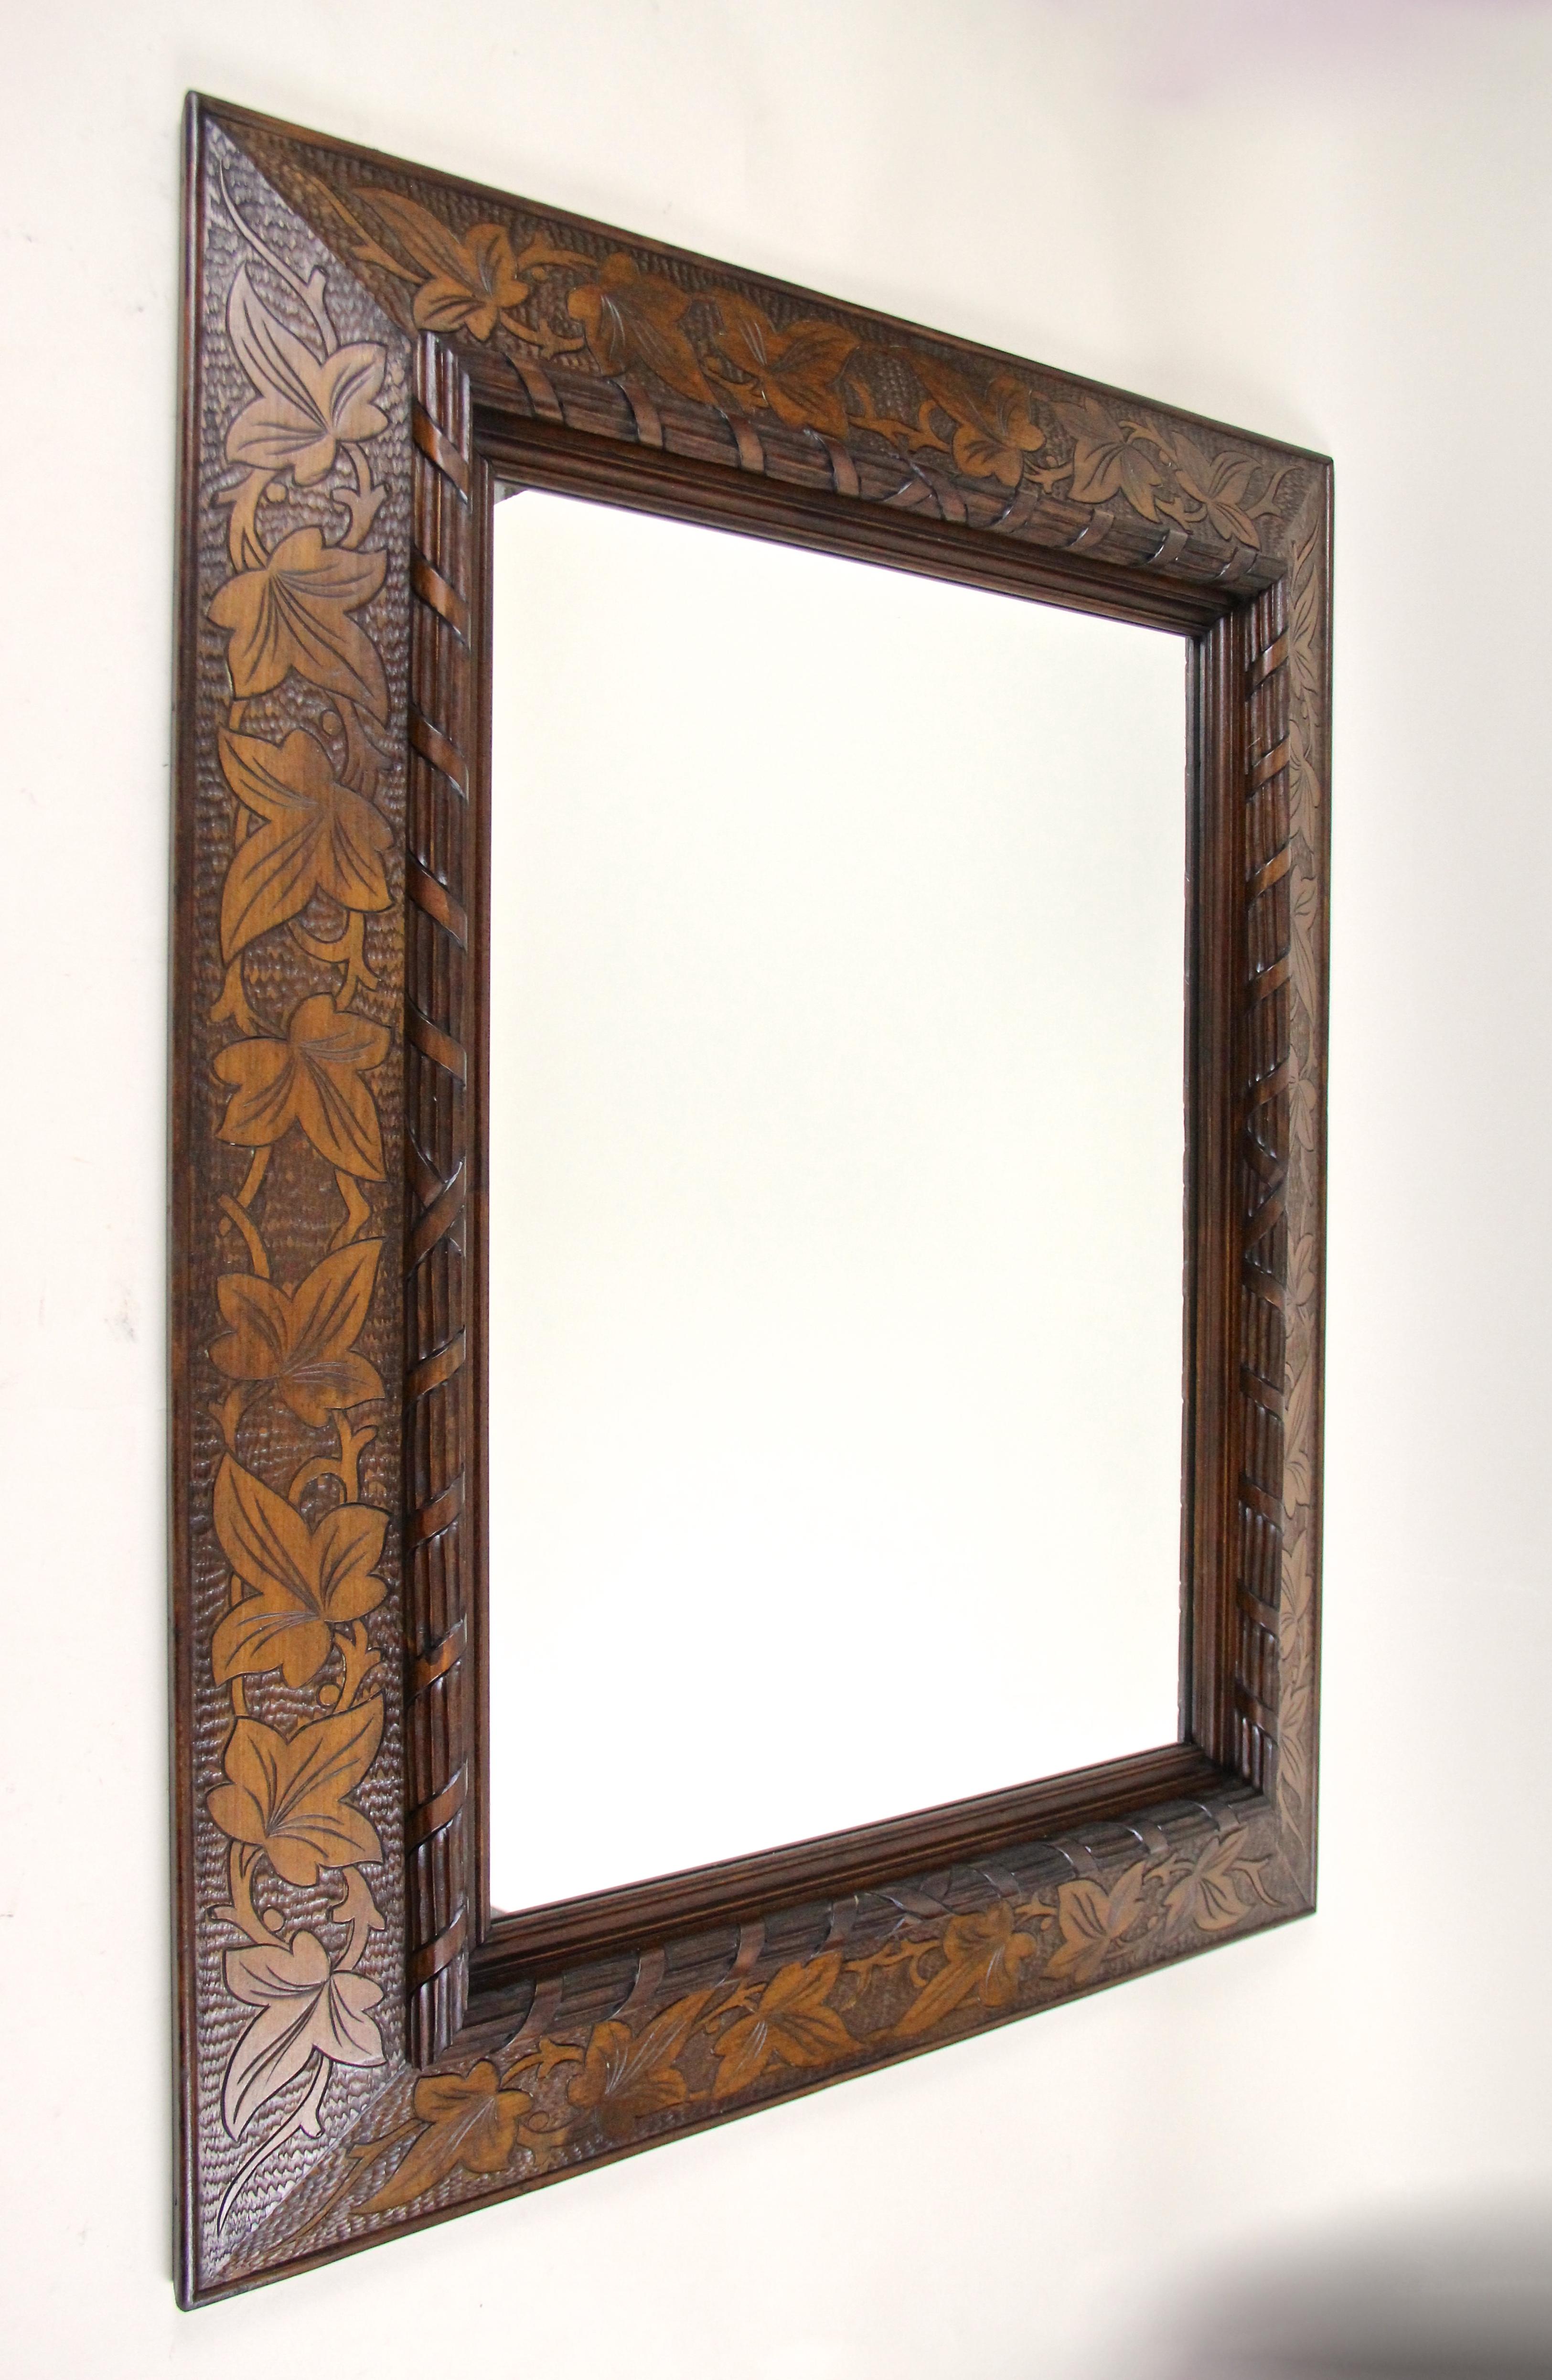 Impressive late 19th century wooden wall mirror from the so-called 